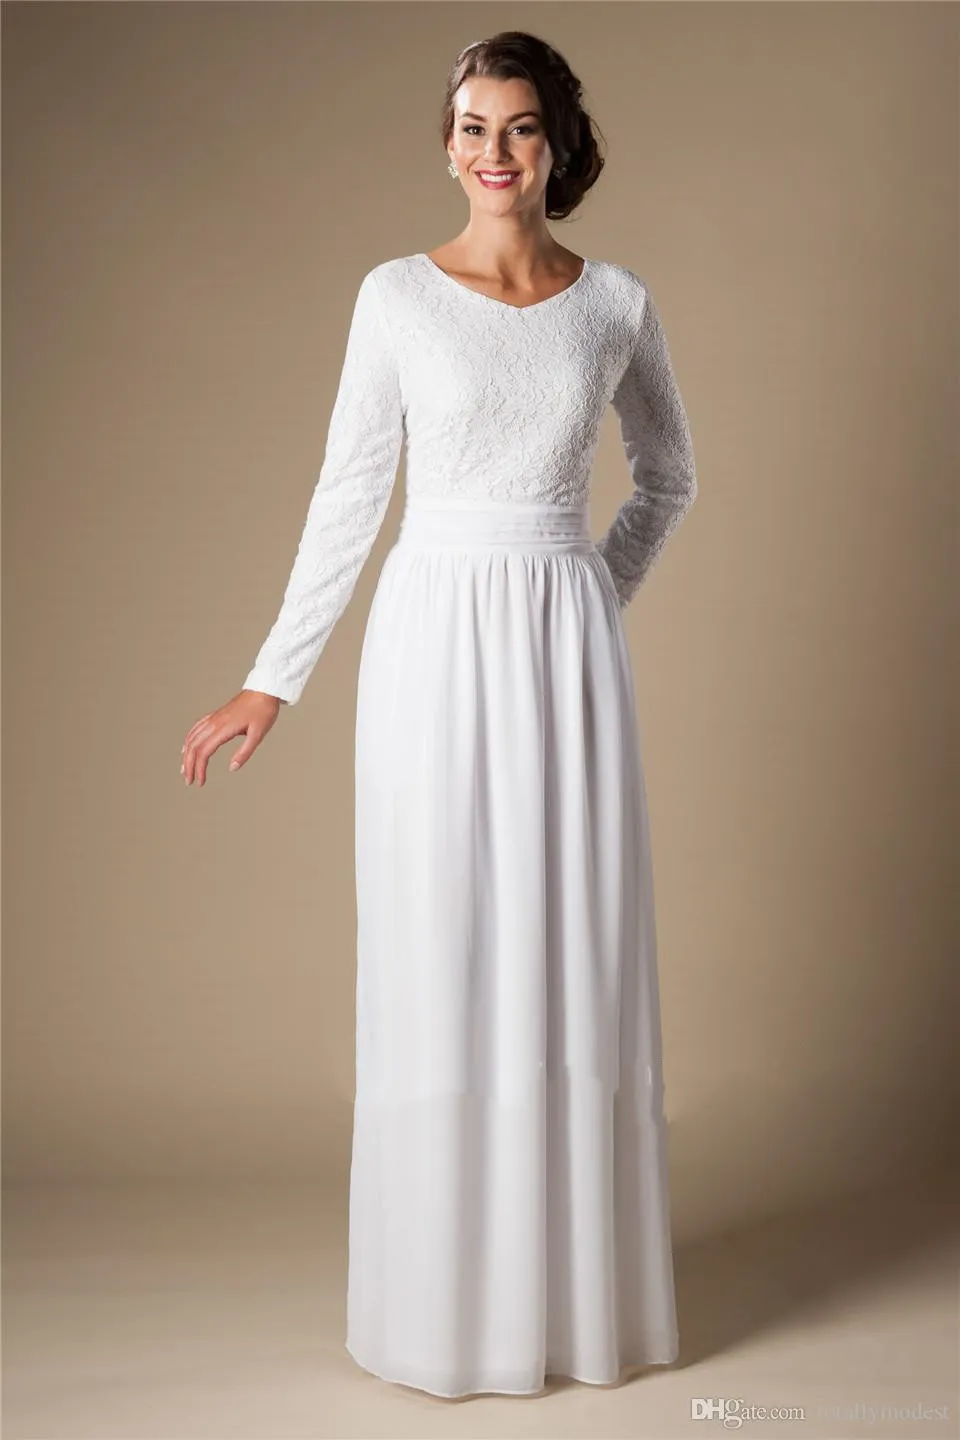 Ivory Lace Chiffon Long Sleeves Modest Wedding Dresses With Sleeves ...